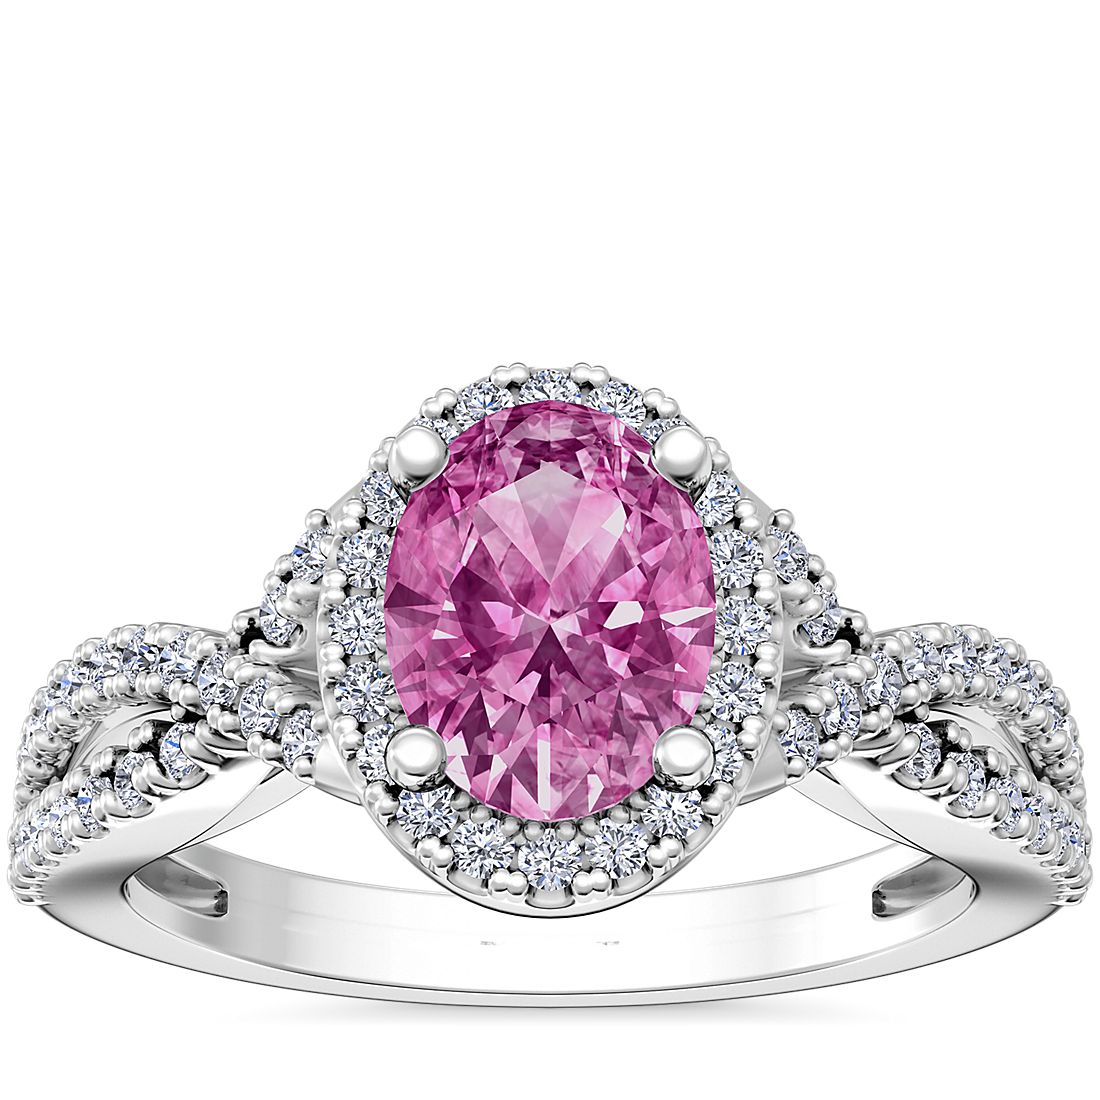 Twist Halo Diamond Engagement Ring with Oval Pink Sapphire in Platinum (8x6mm)